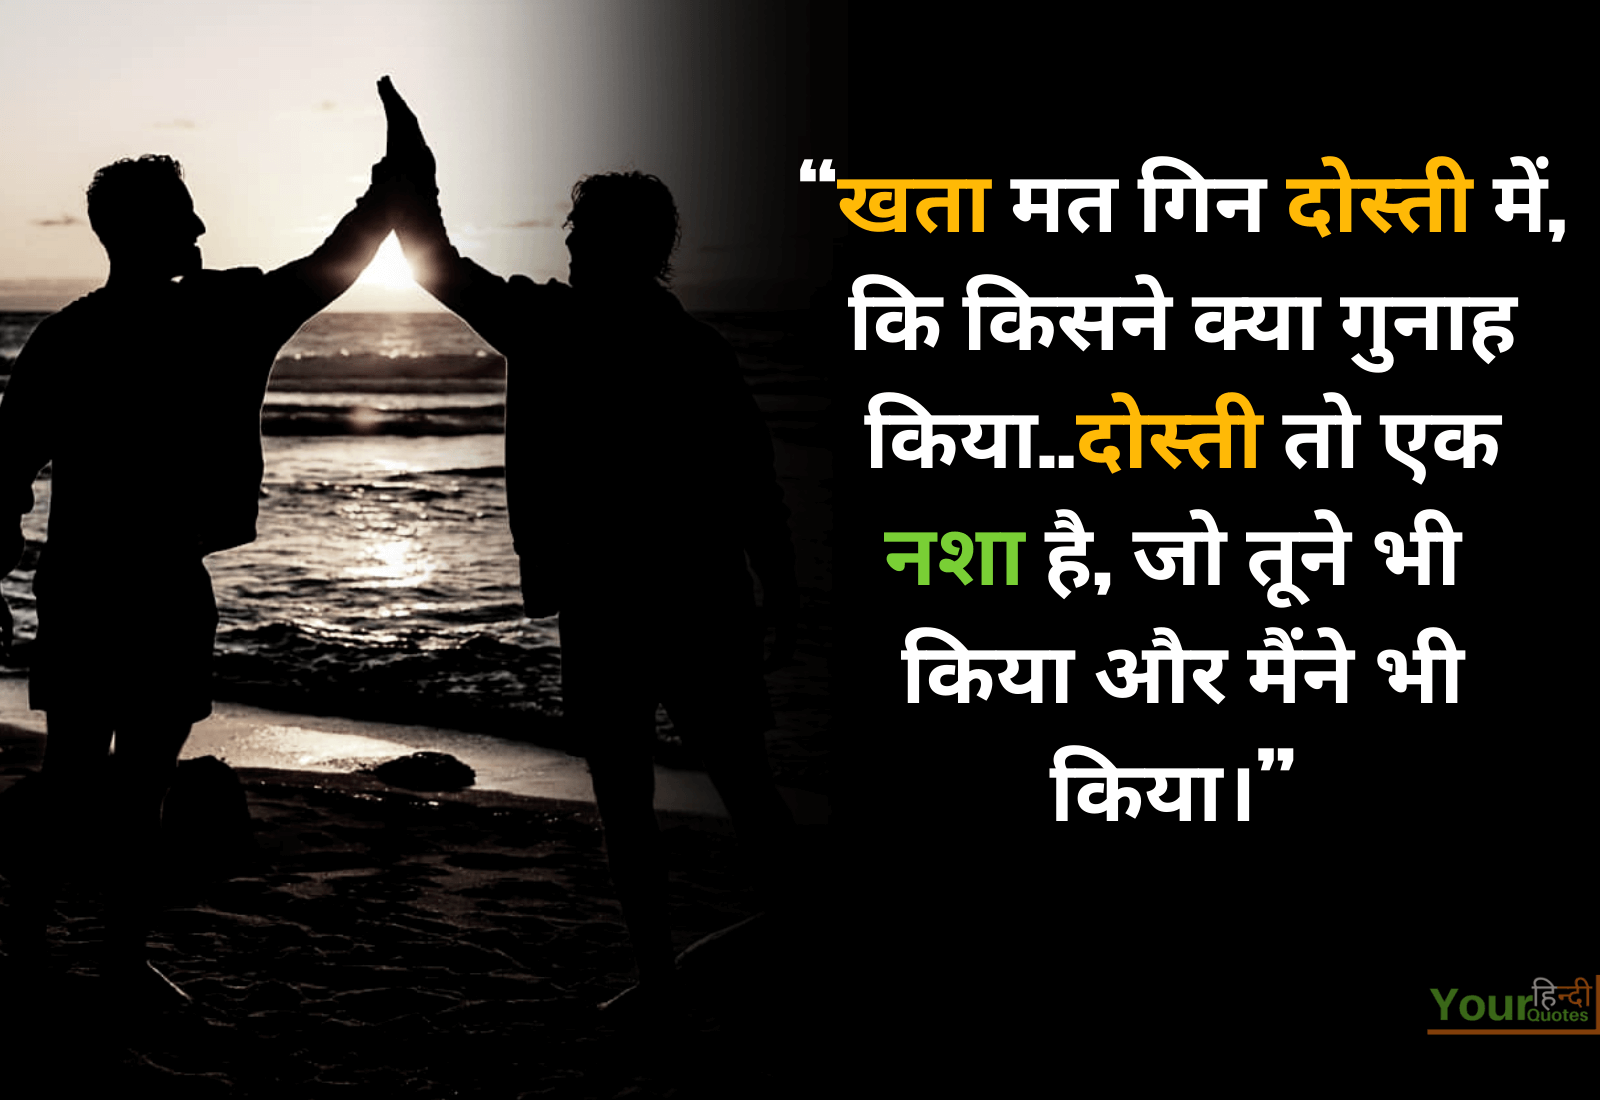 Friendship Quotes image in hindi